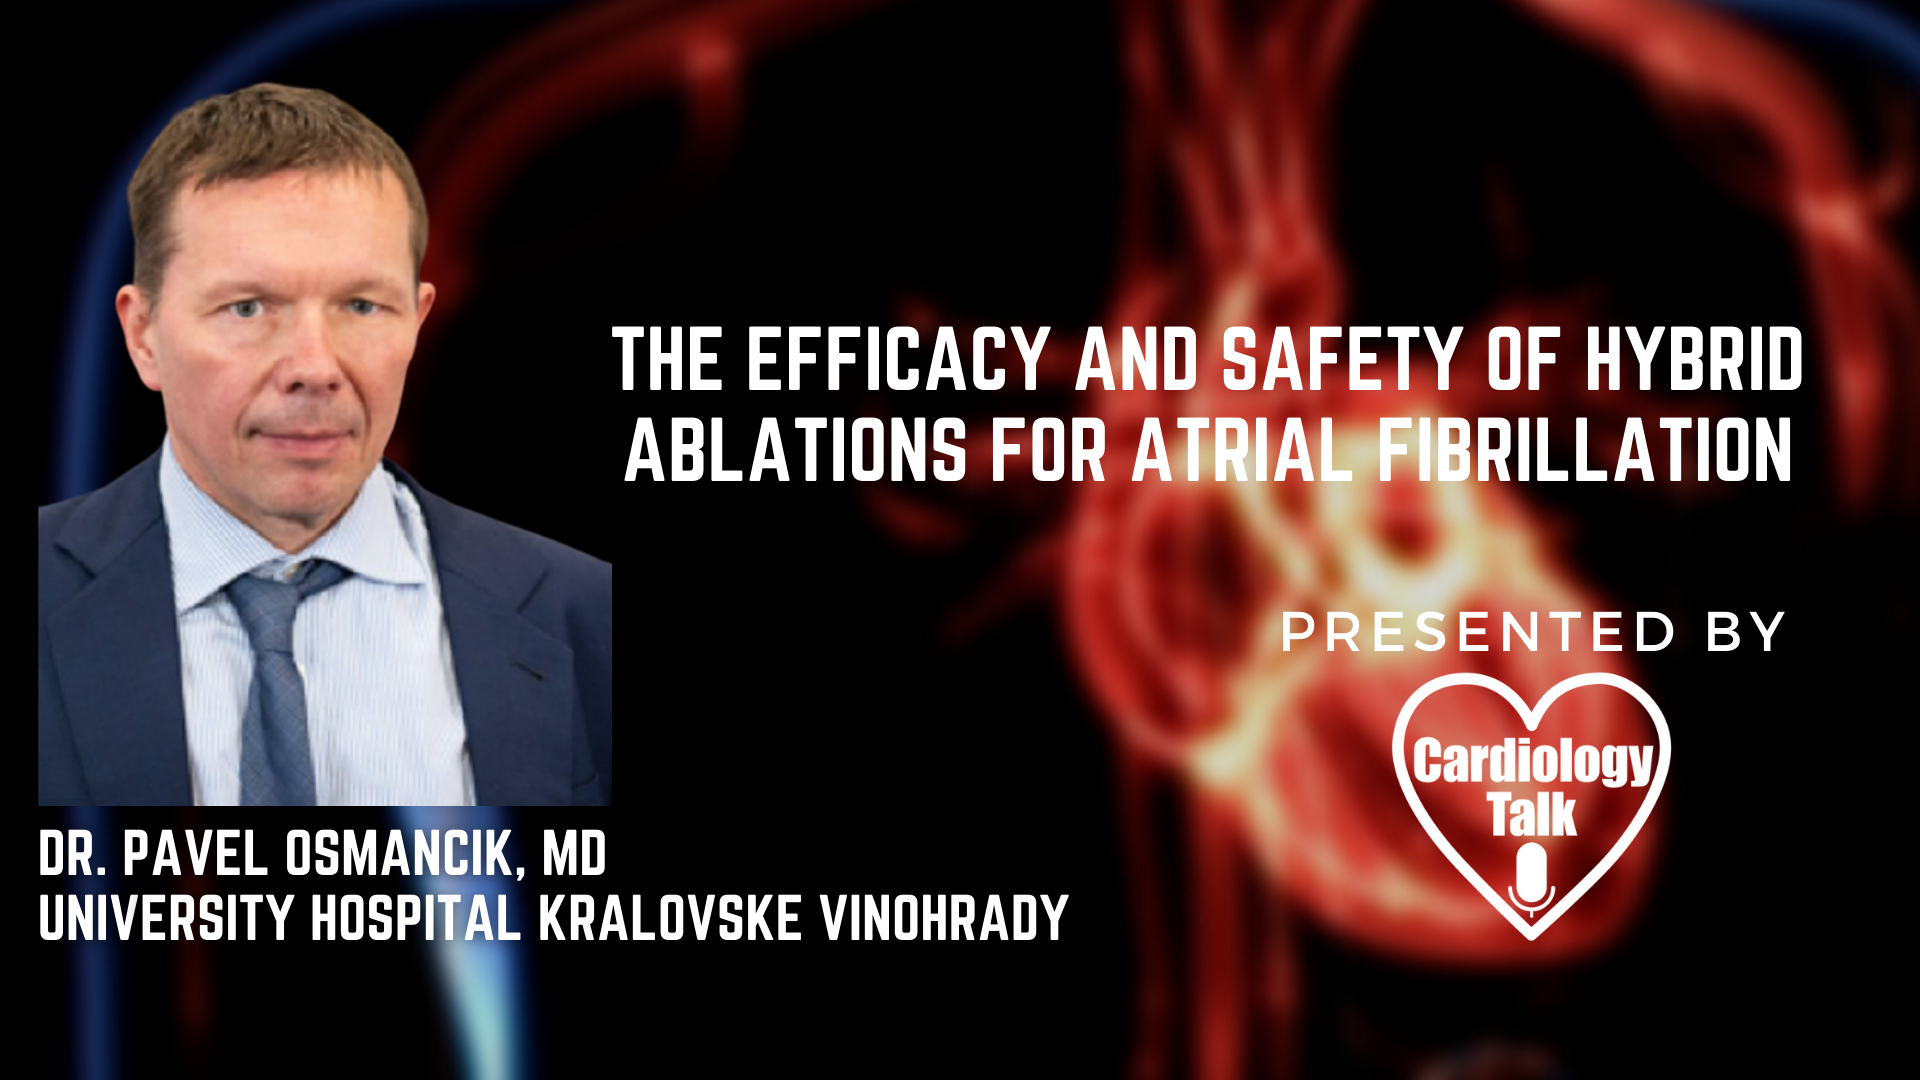 Dr. Pavel Osmancik, MD- The Efficacy and Safety of Hybrid Ablations for Atrial Fibrillation